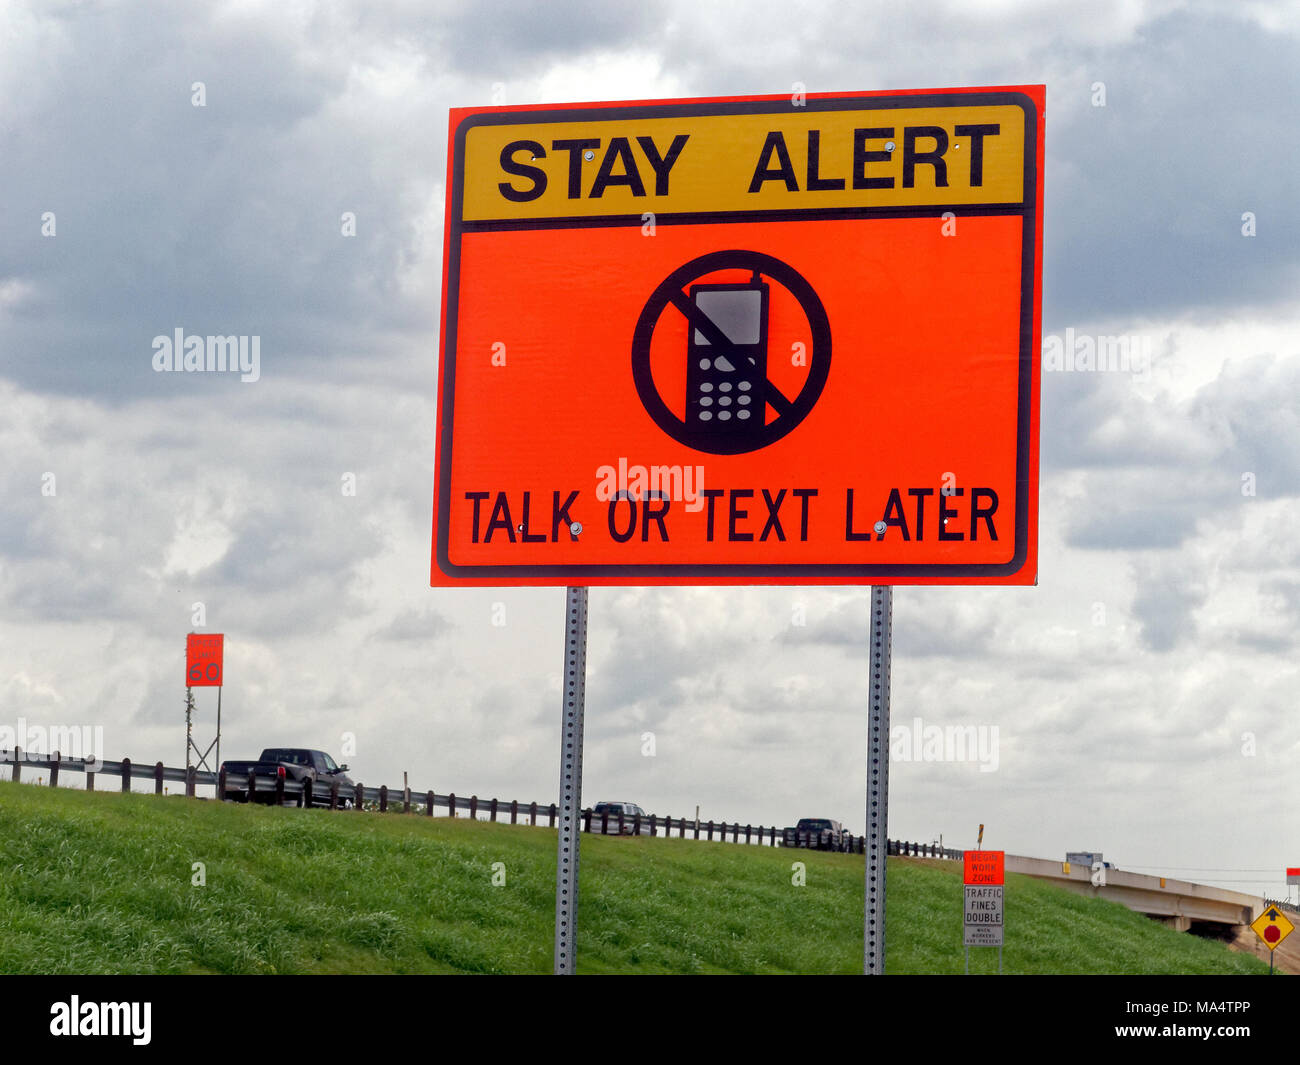 Along the highway a sign warns drivers to stay alert and not to use their smartphone and cellphone while driving. Texting has become a major cause of accidents on today's roads whether on city streets or the motorway. Stock Photo